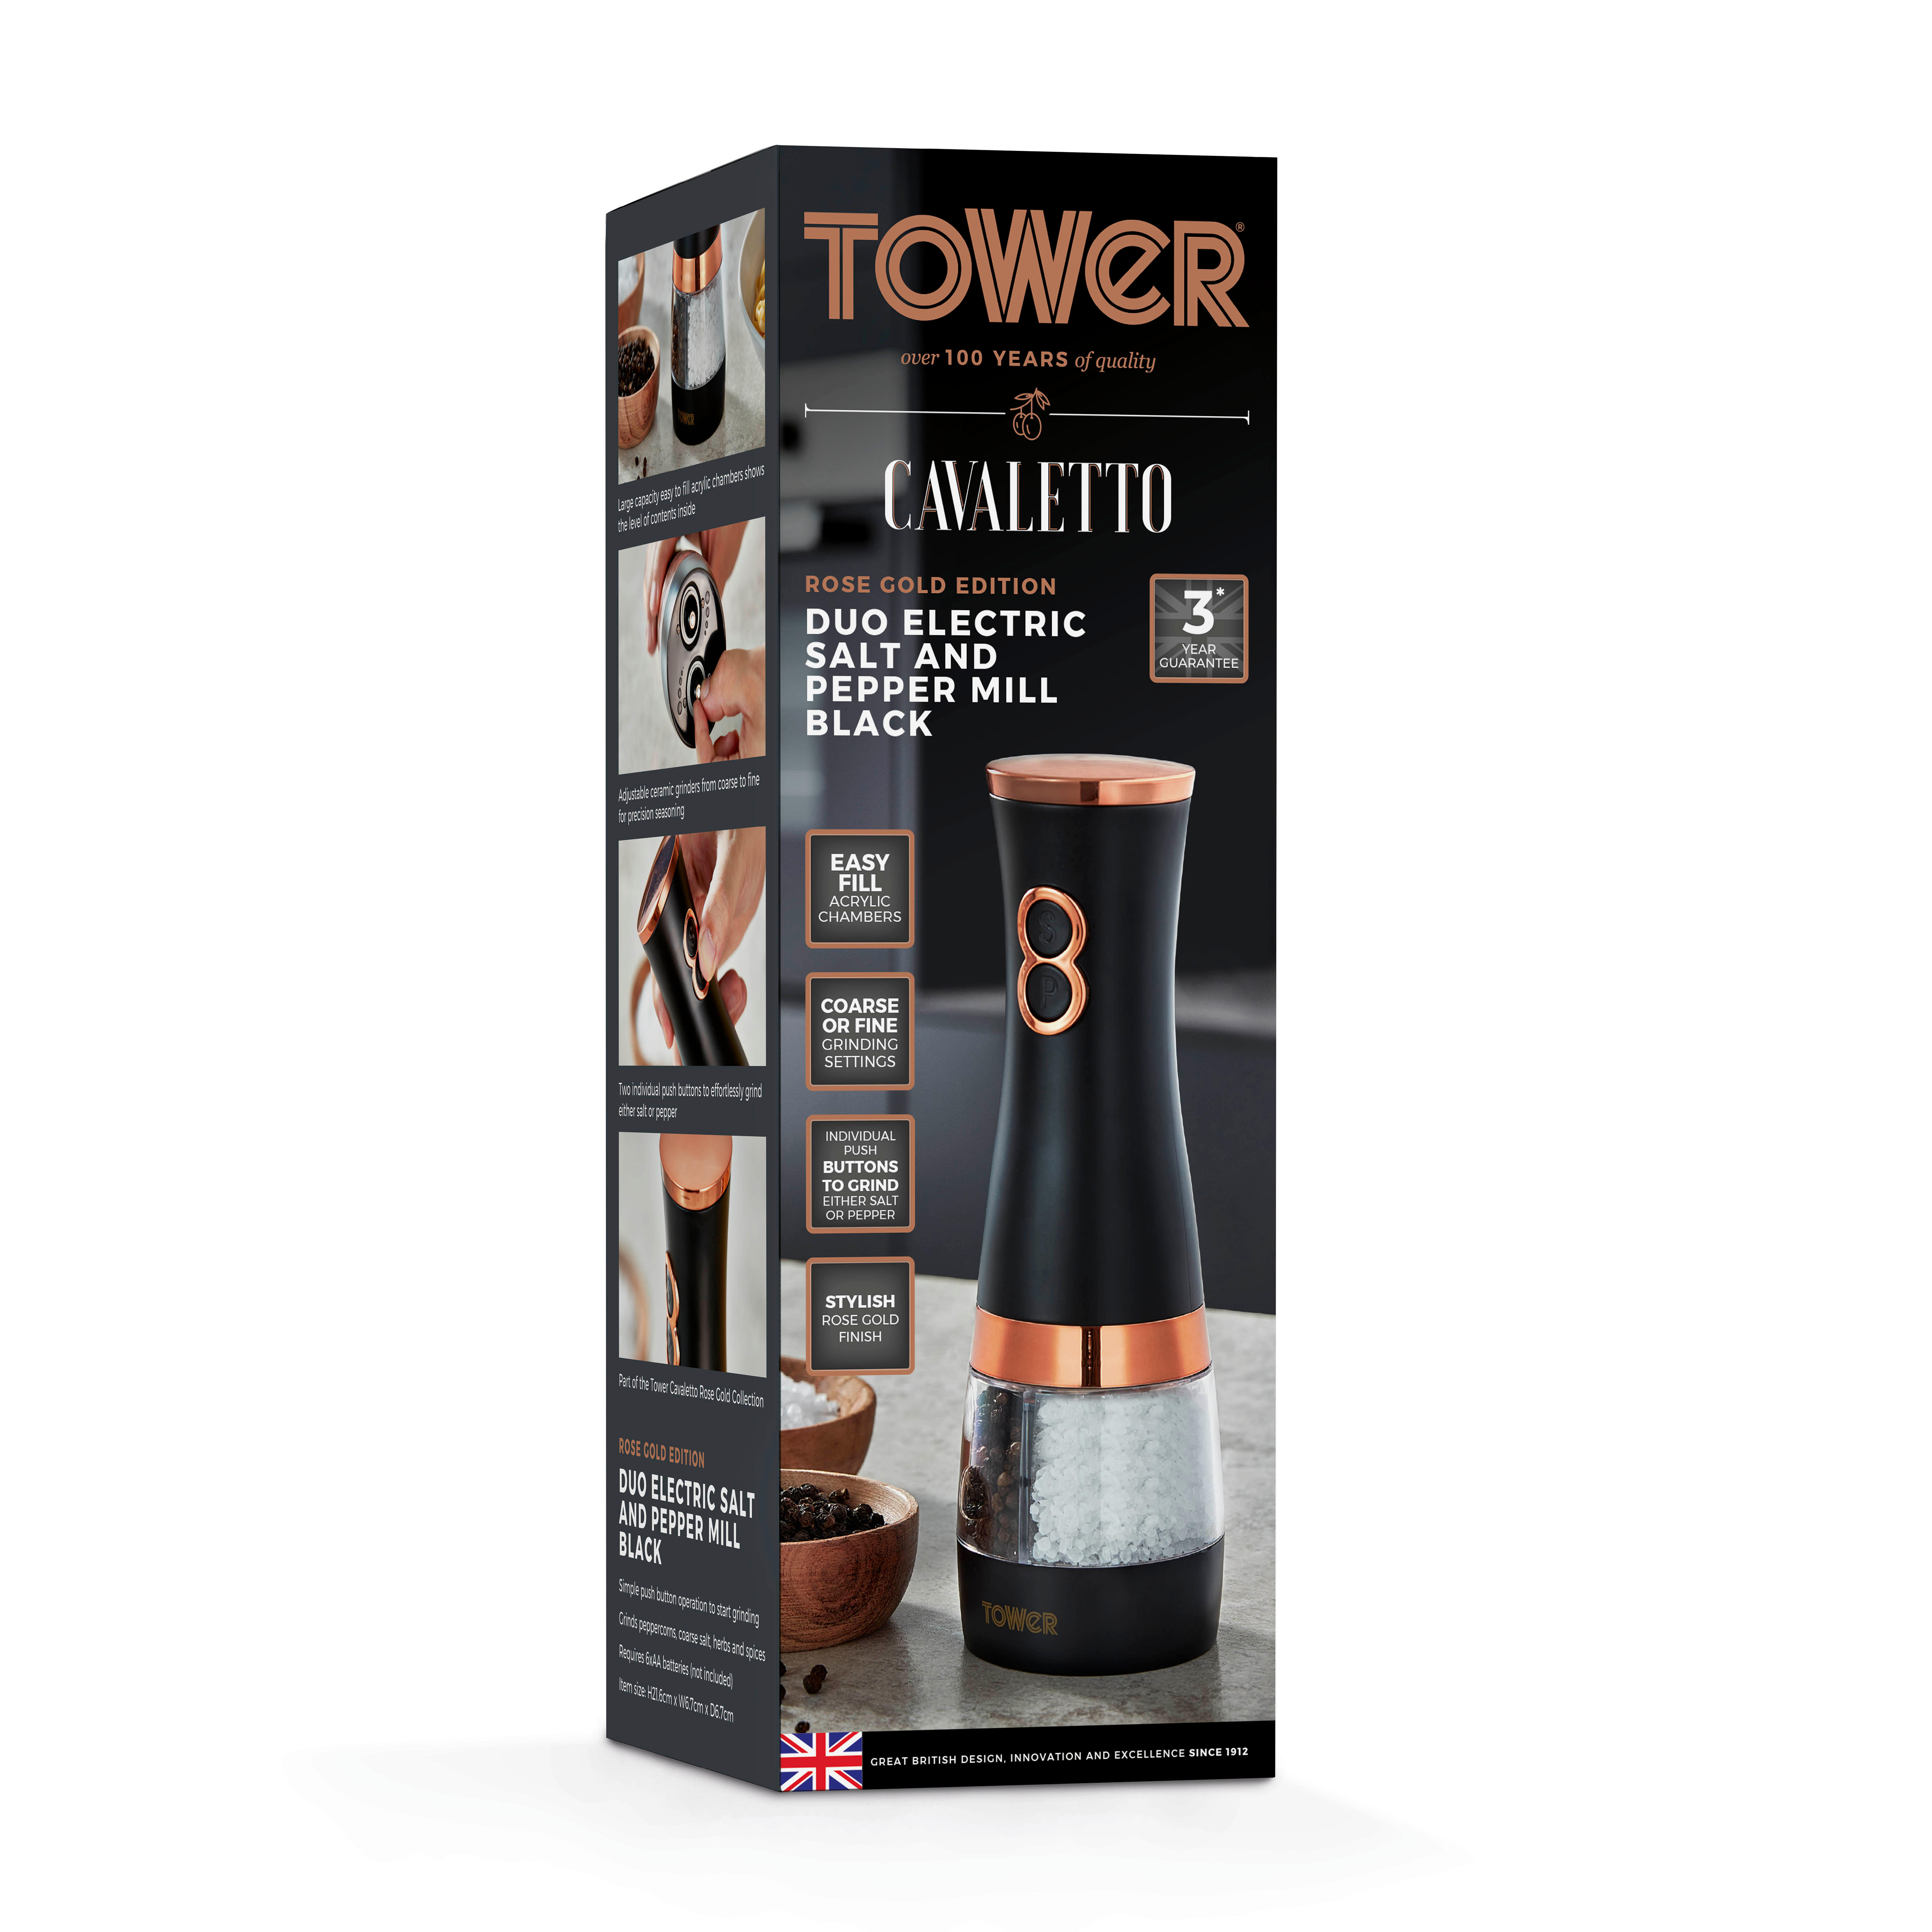 https://assets.iceland.co.uk/i/iceland/Tower_Cavaletto_Salt_and_Pepper_Mill_94815